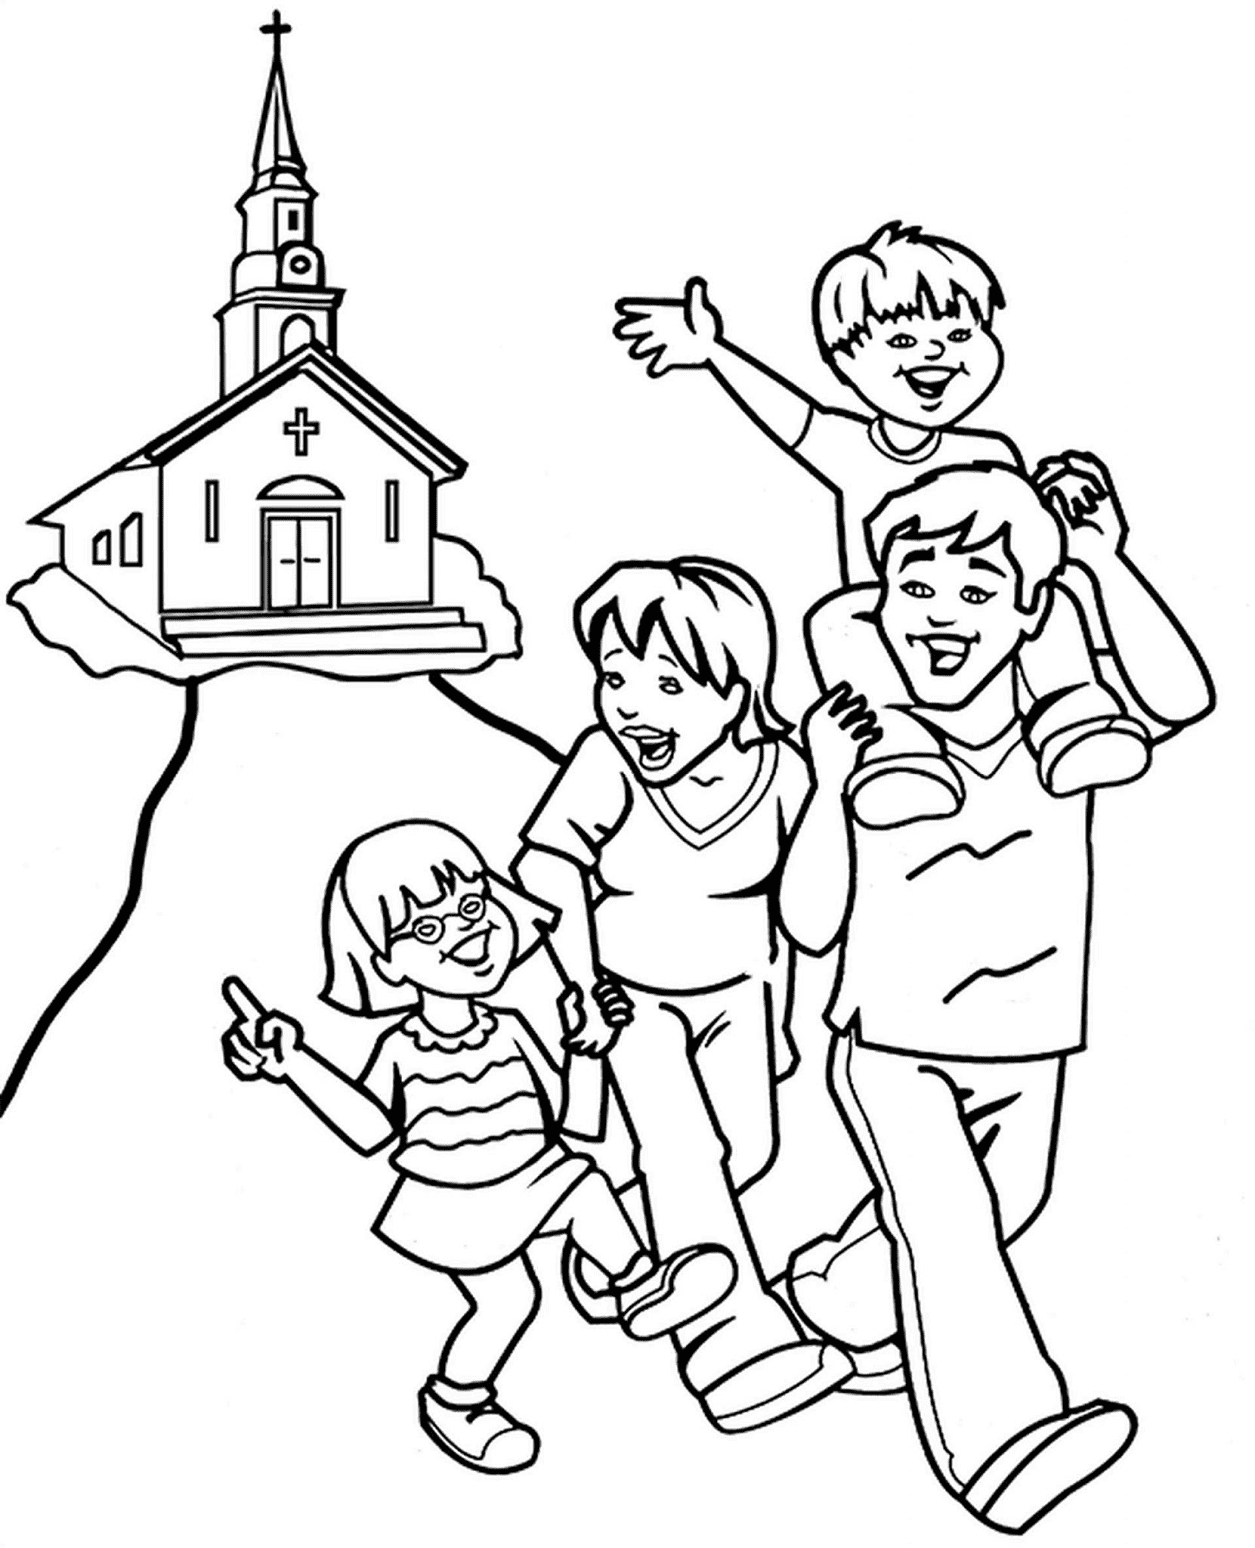 Happy Family Going Home From Church Coloring Page